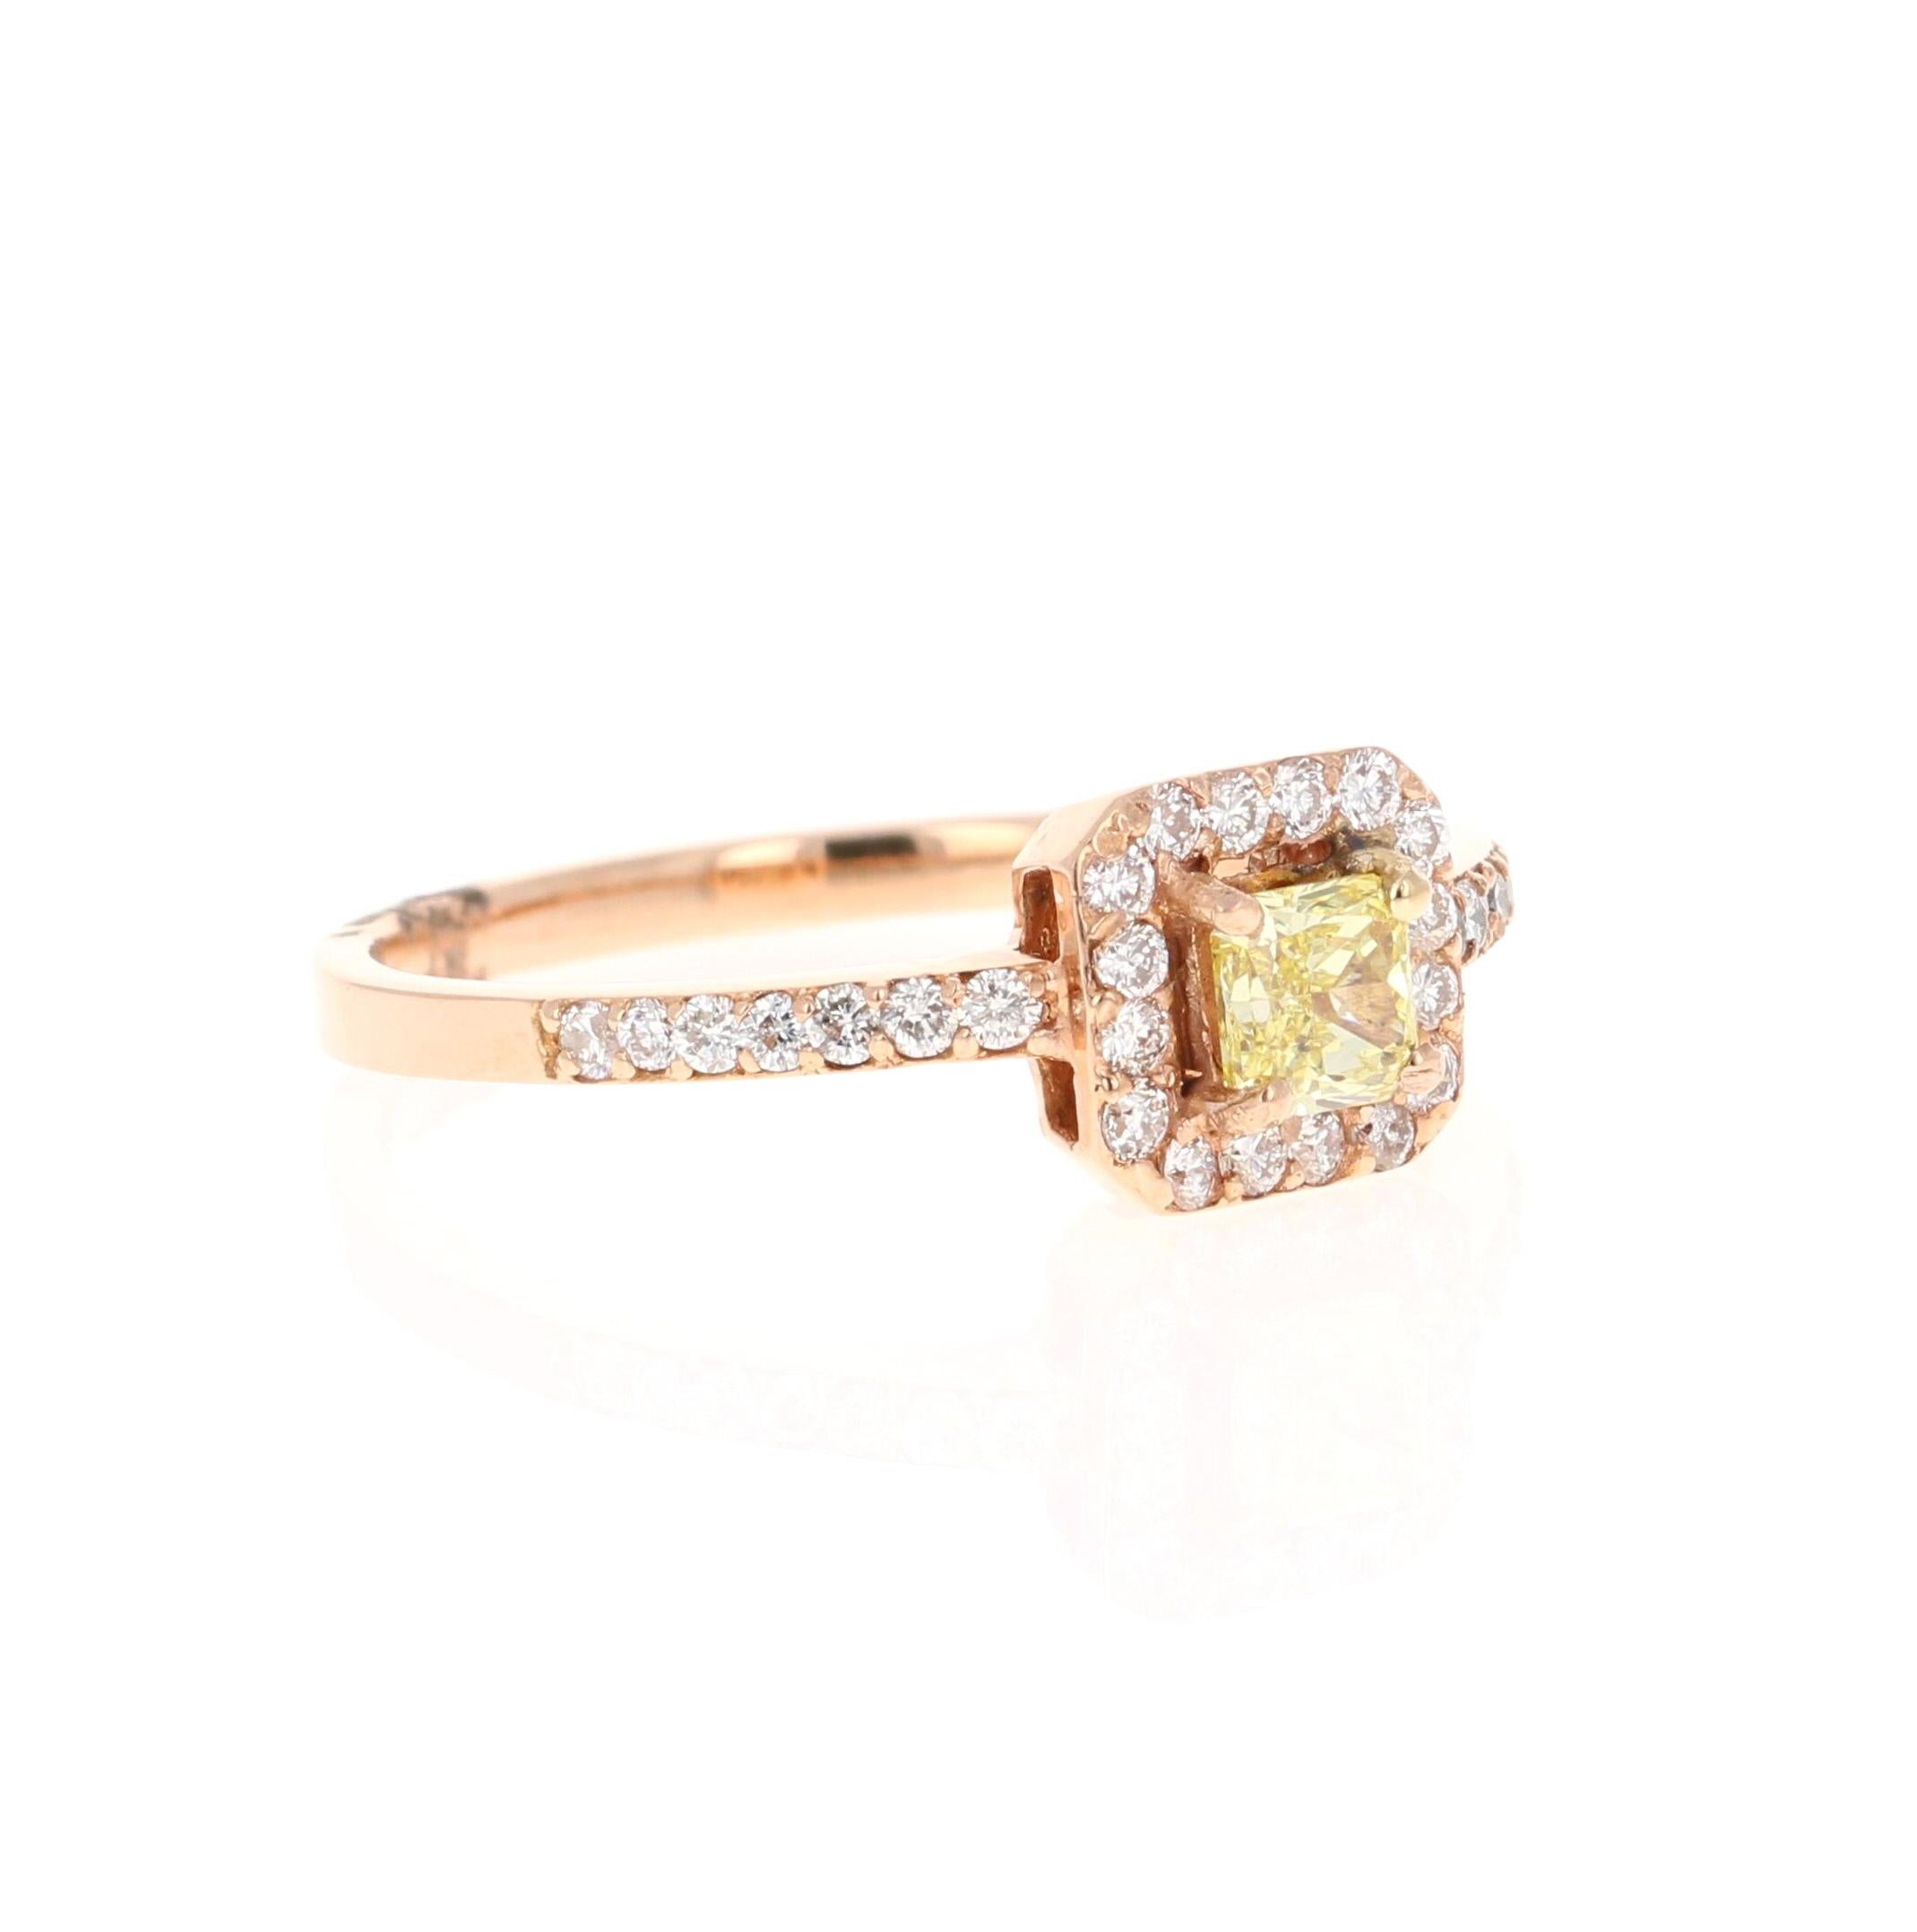 This beautiful engagement ring has a Princess Cut Yellow Diamond that weighs 0.32 carats with a VS Clarity and Color is Fancy Yellow. There are 30 Round Cut Diamonds that weigh 0.31 Carats, Clarity: VS, Color: F. The total carat weight of the ring